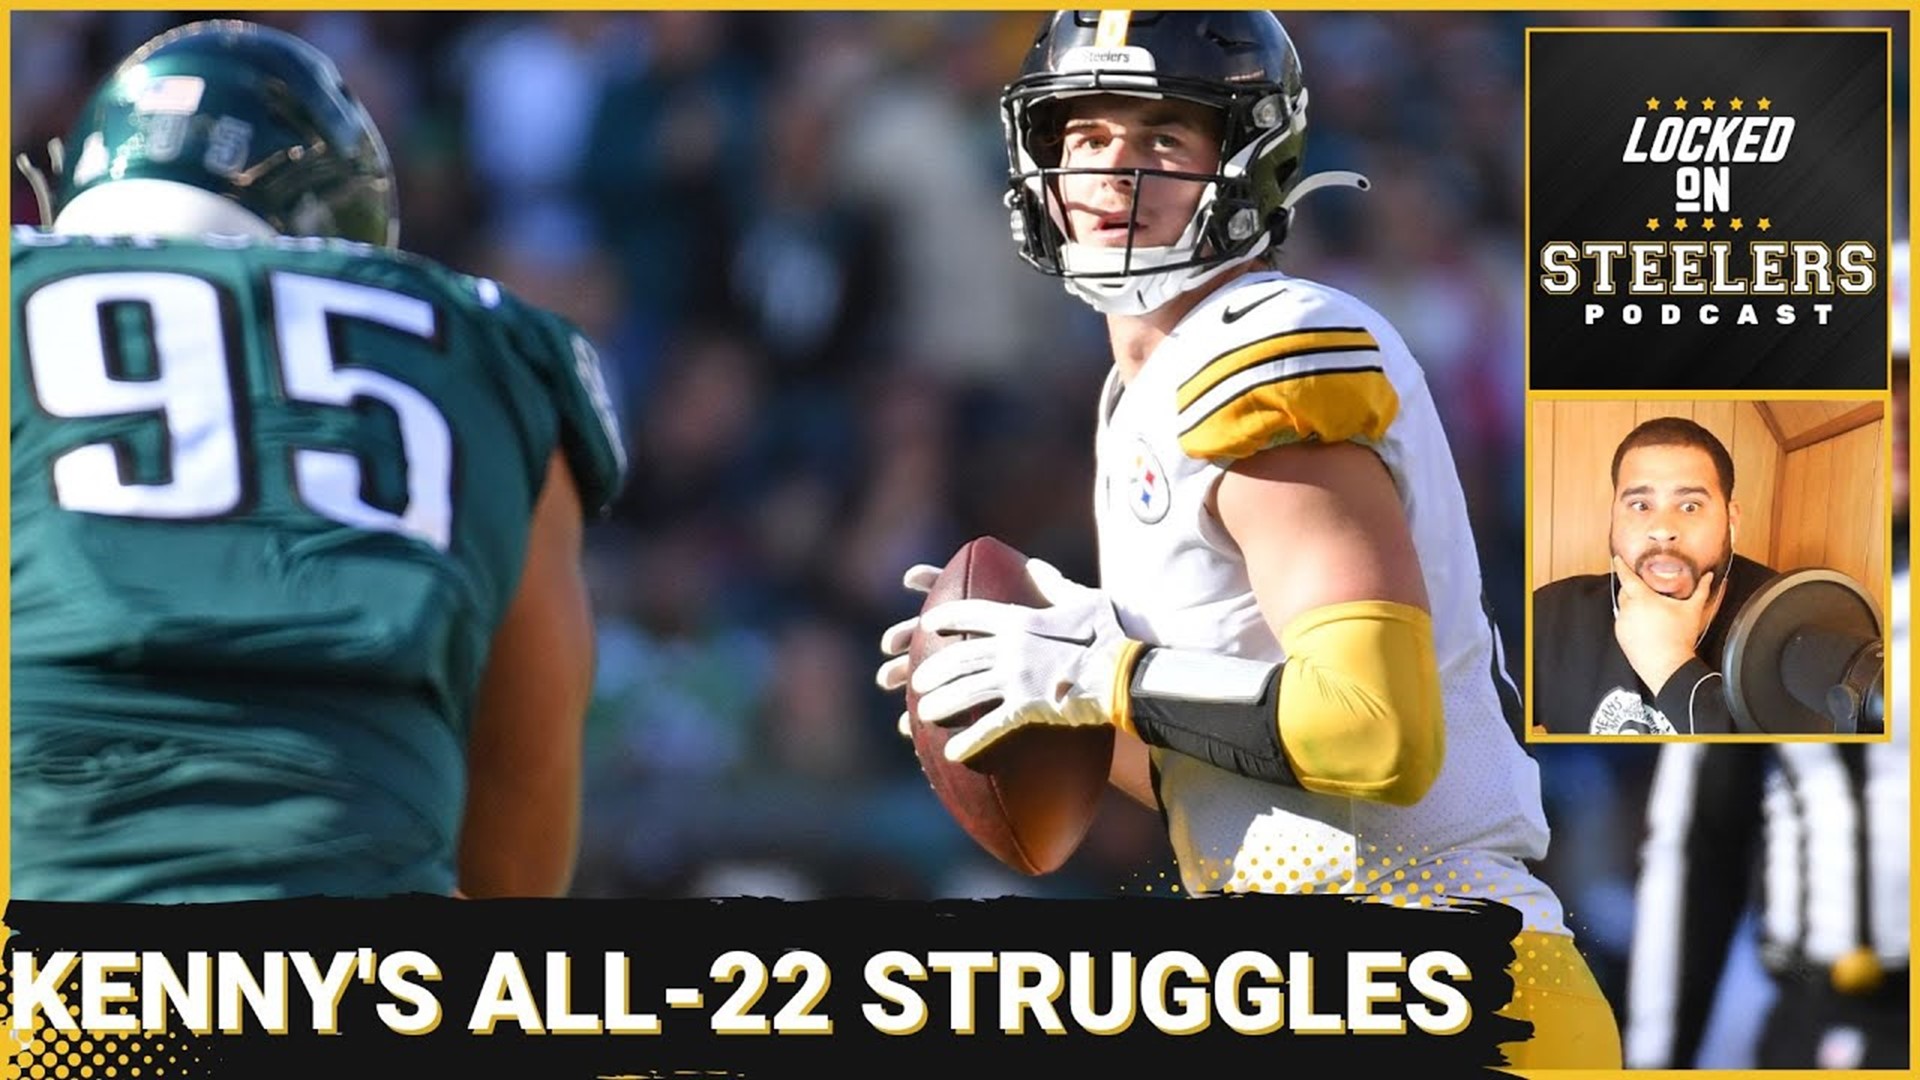 The Steelers quarterback Kenny Pickett had a rough game Sunday against the Philadelphia Eagles, and it's even more apparent after watching the Steelers' All-22 film.